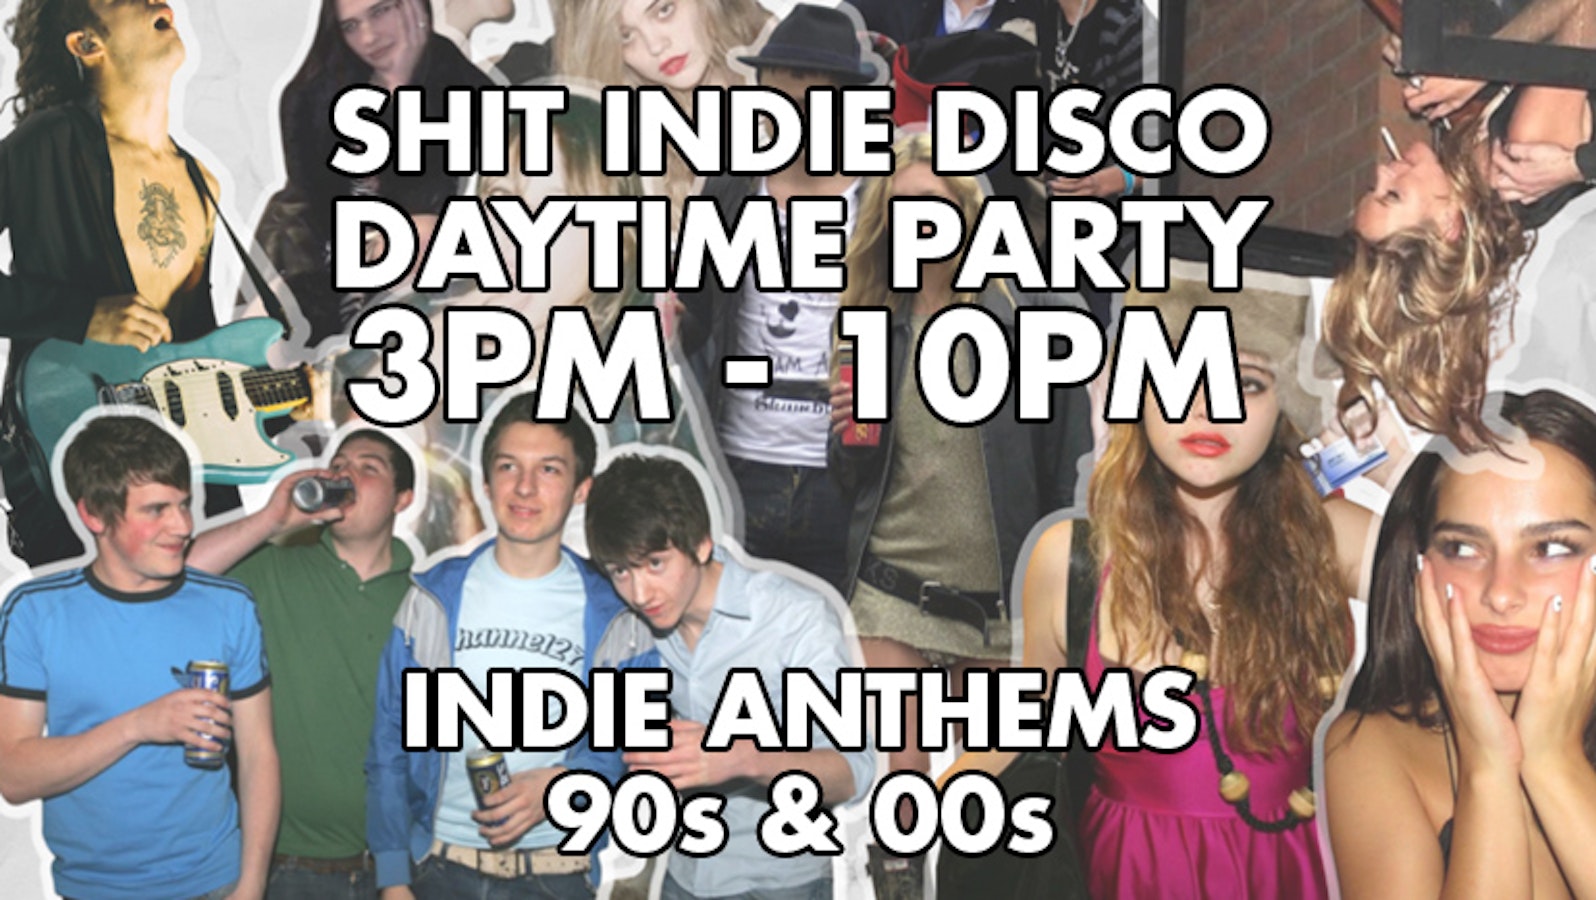 Shit Indie Disco presents “Over 25s Daytime Indie Disco” Indie Sleaze Era Special – 3pm-10pm